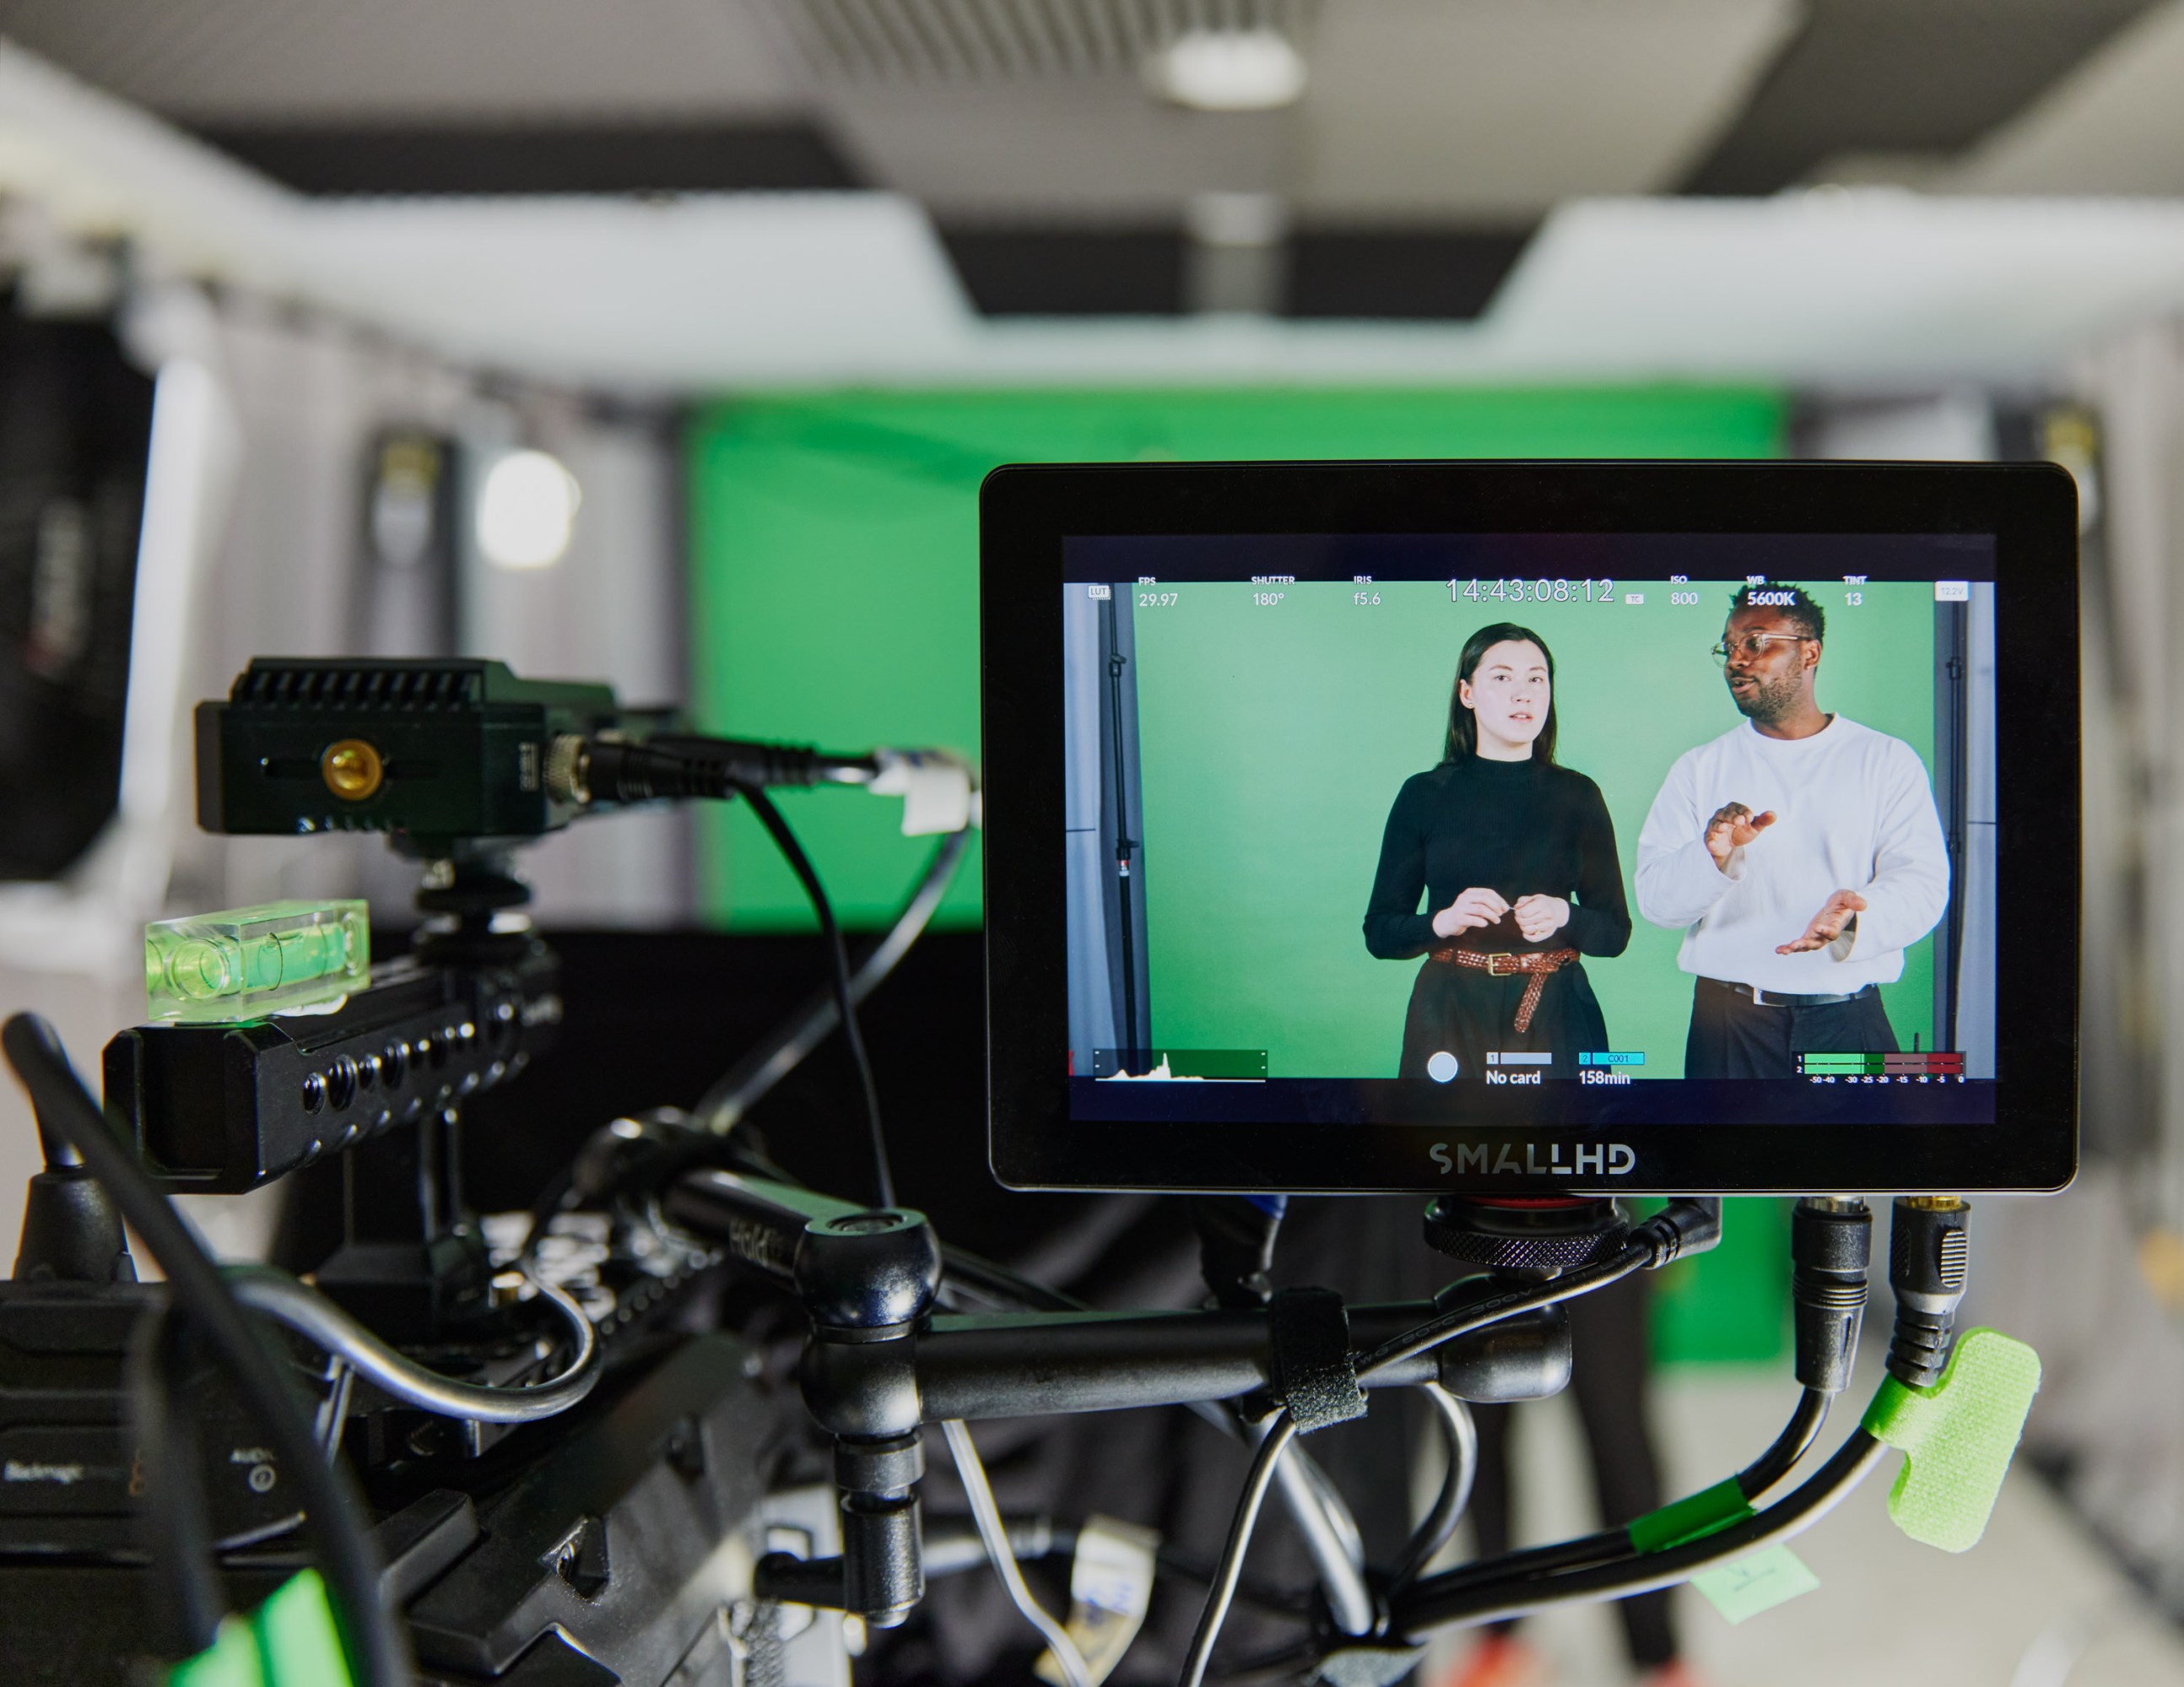 monitor on a video camera showing Heikkilä and Oshinyemi on set in front of the green screen